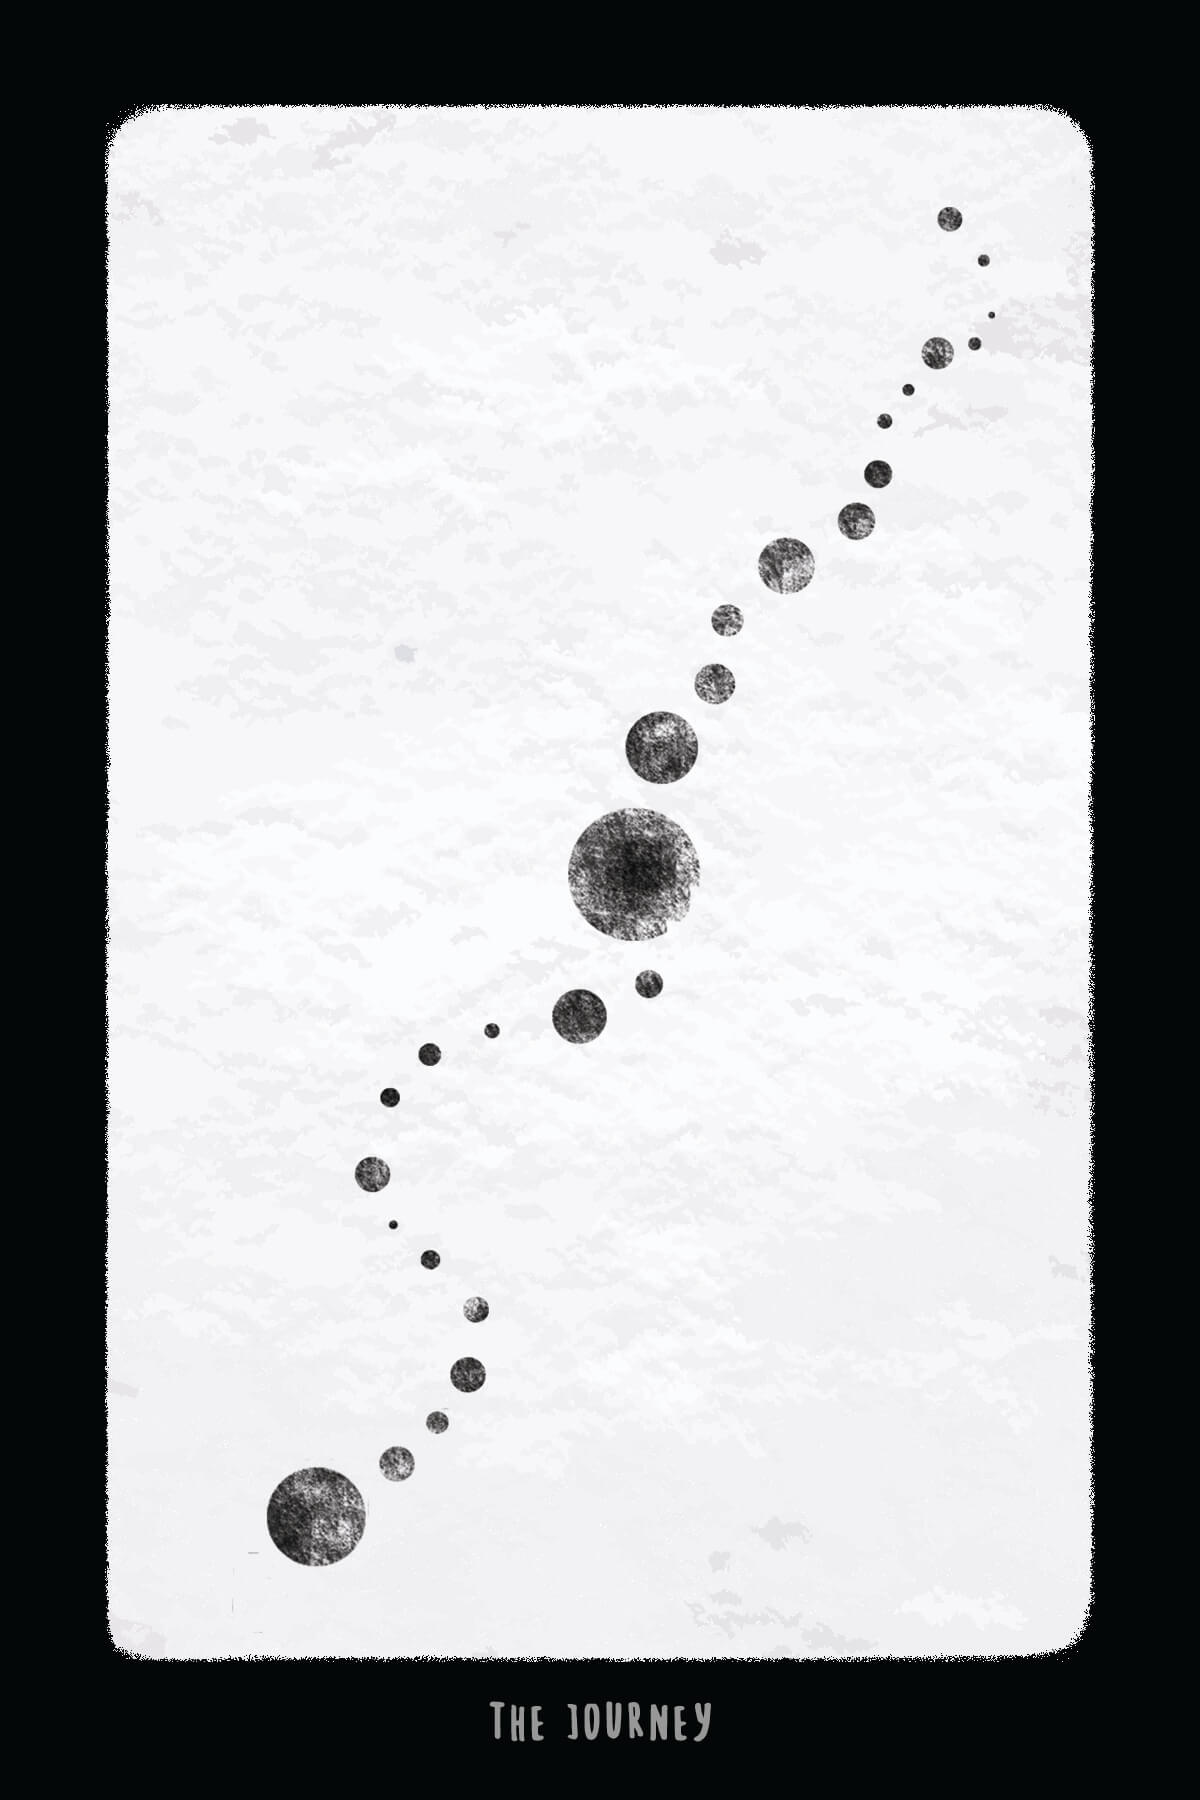 A black and white drawing of a trail of circles that are shaded to look like the surface of the moon. There is a black border around the image and the words "the journey" are printed in the bottom border.